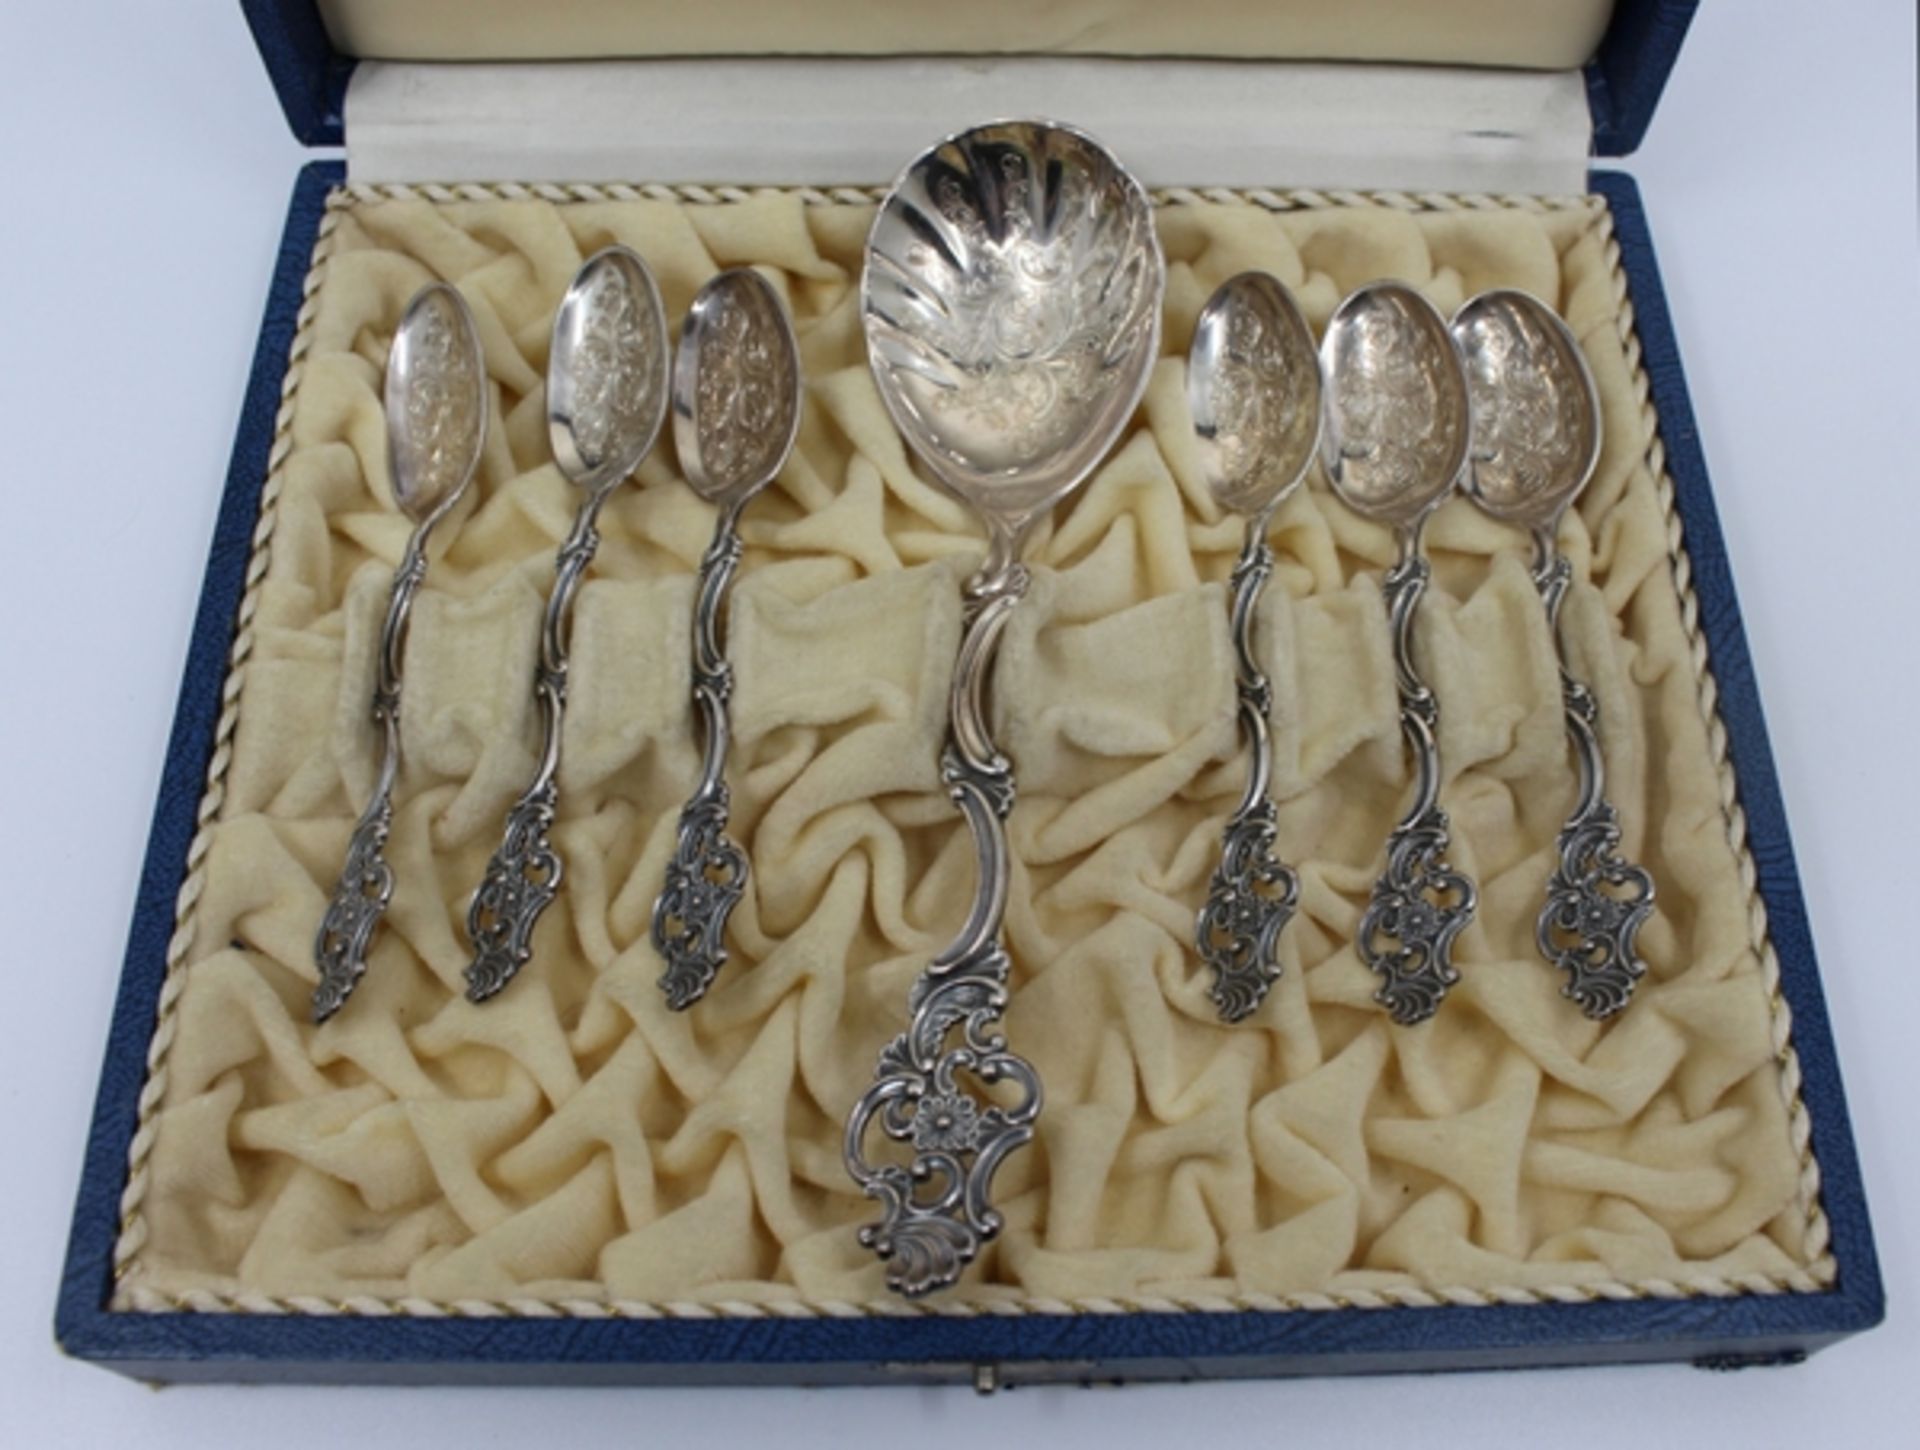 Early 20th c. Norwegian Silver Spoons by Thorvald Marthinsen Sølvvarefabrik - Image 2 of 4